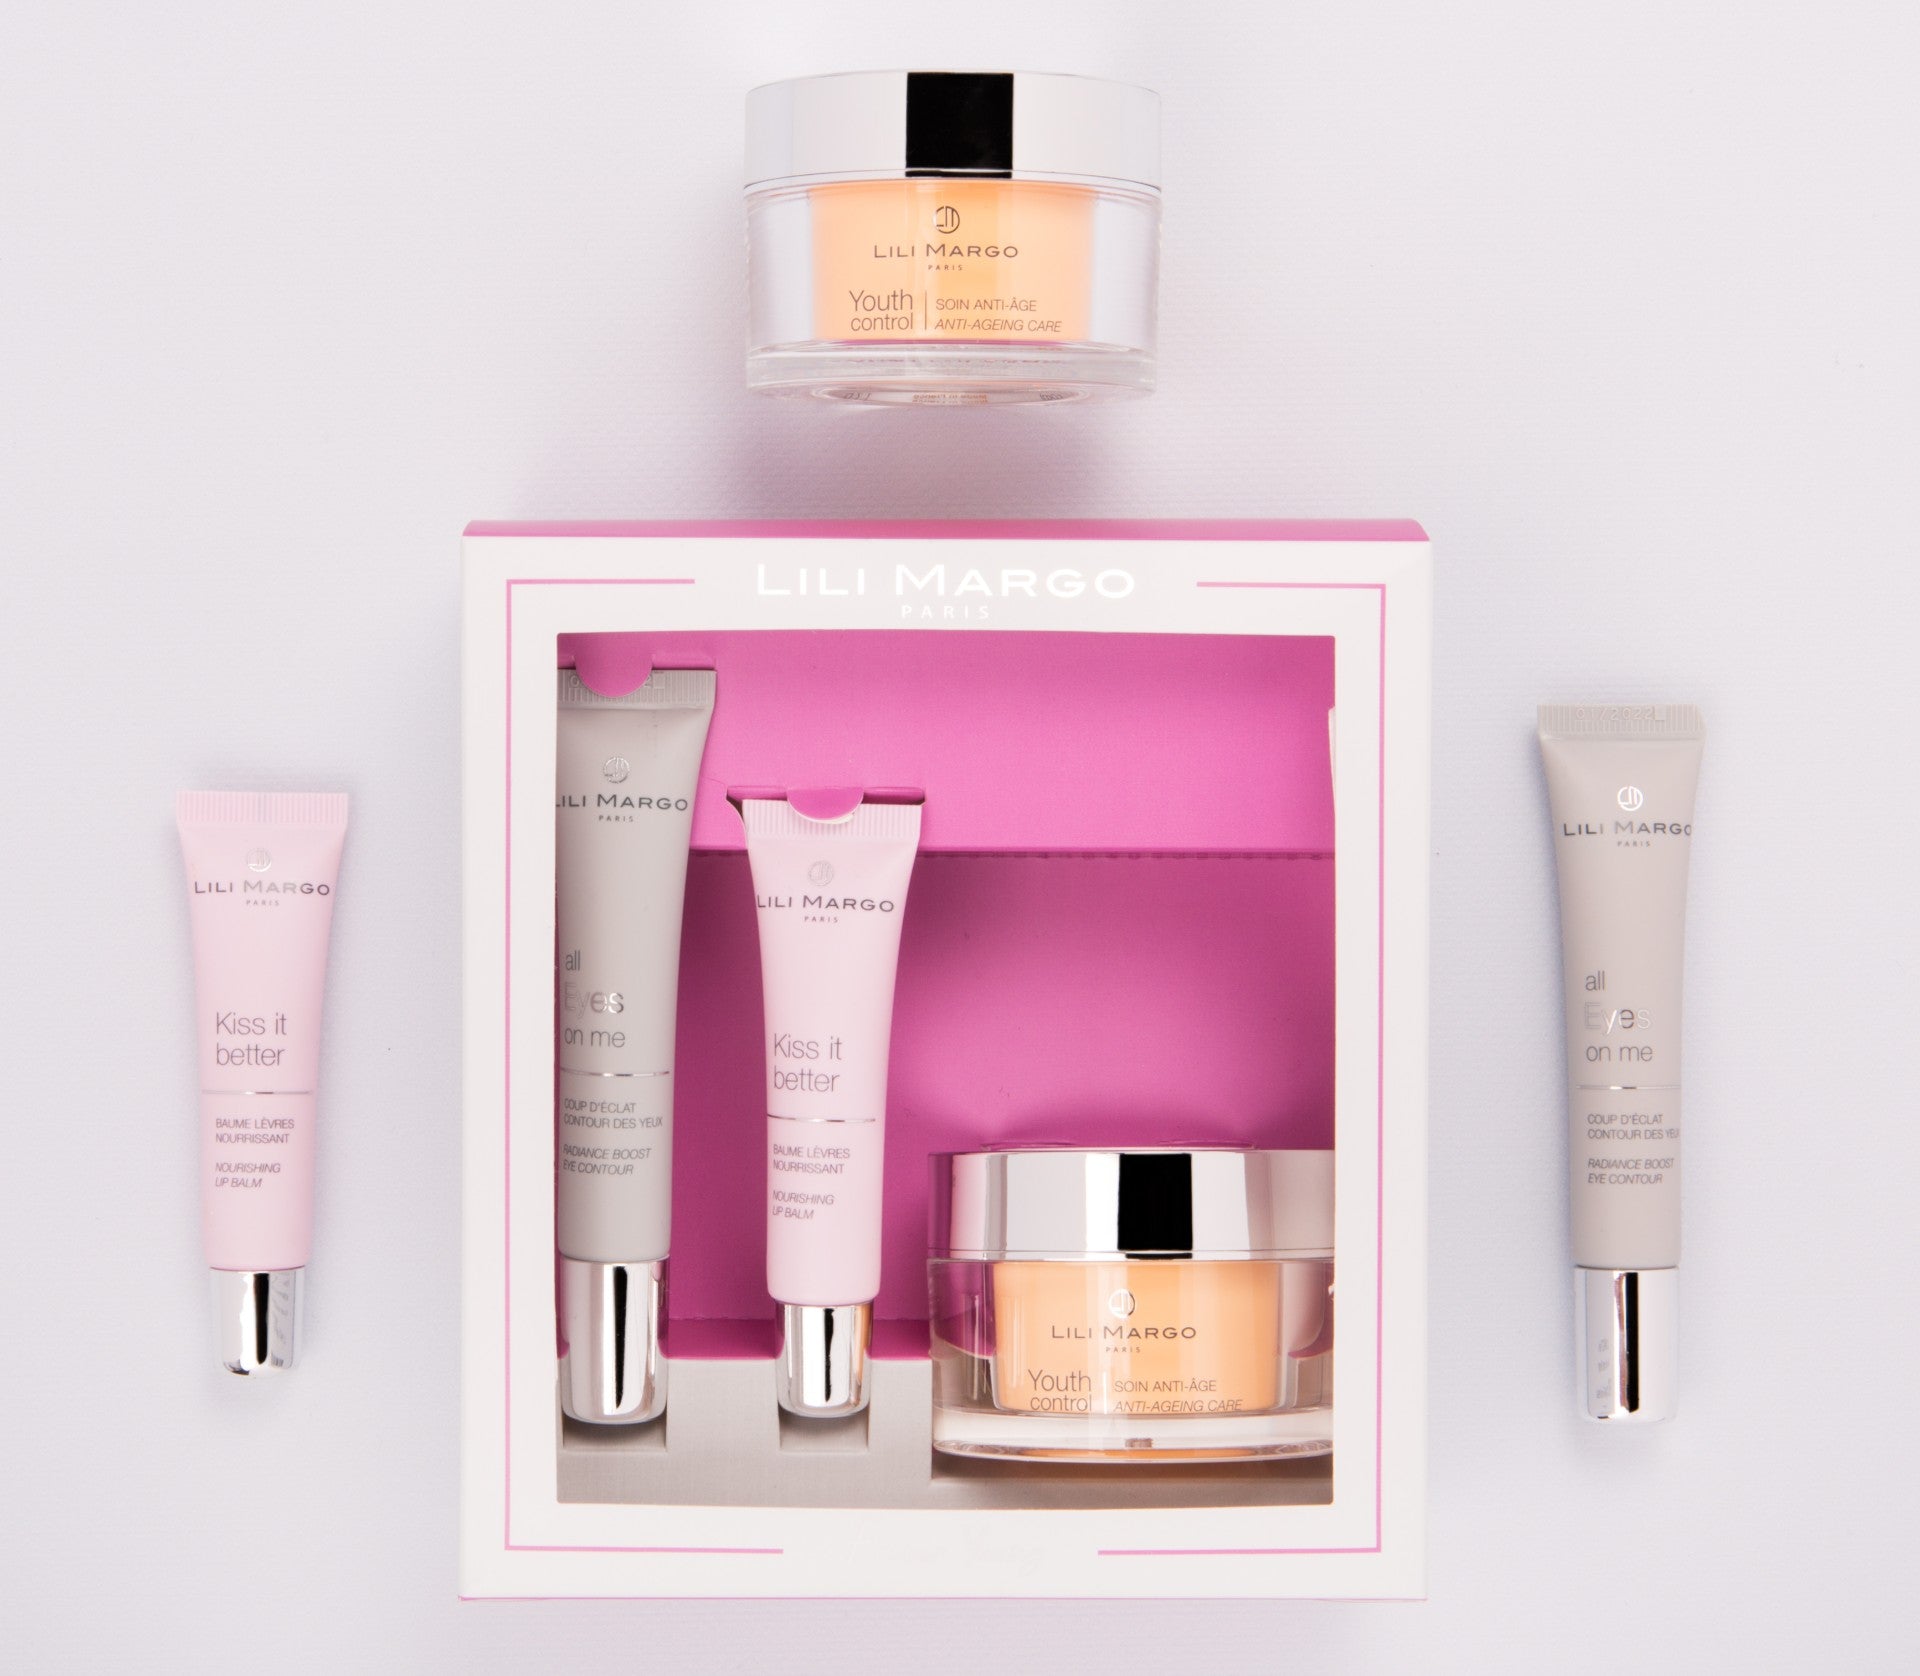 The Forever Young box set will delight all skin types from the youngest to the most mature ones. The 3 products in the box allow a complete hydration